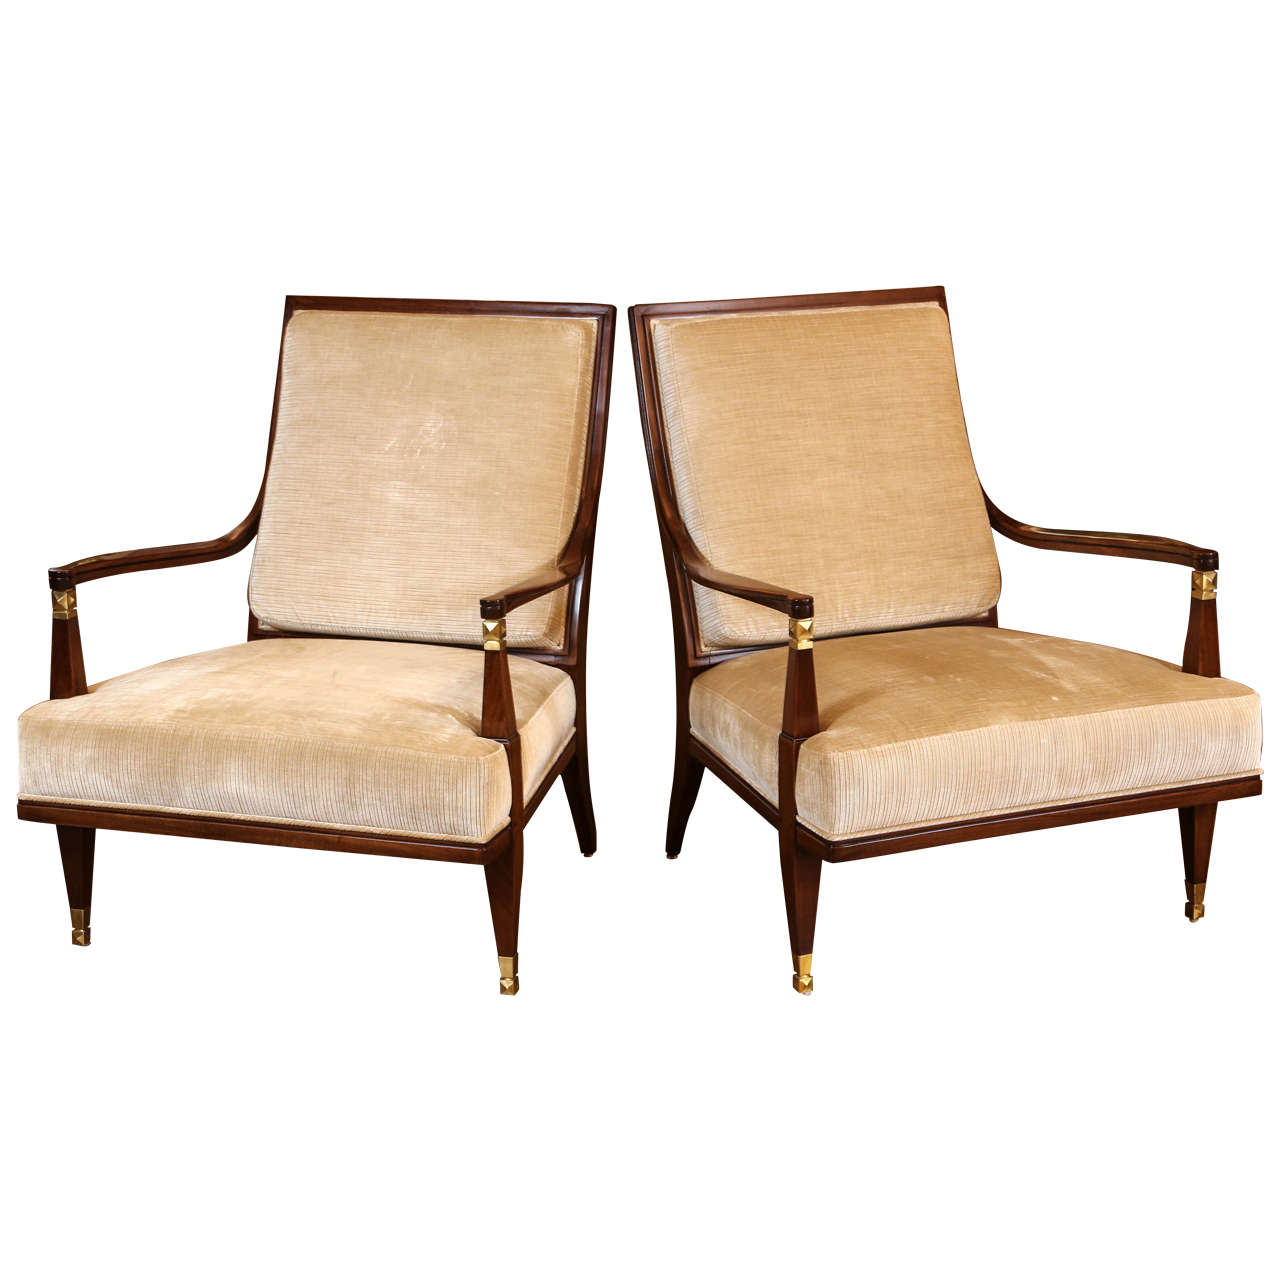 Pair of Beautiful Fauteuils from the Lucien Rollin Collection by William Switzer